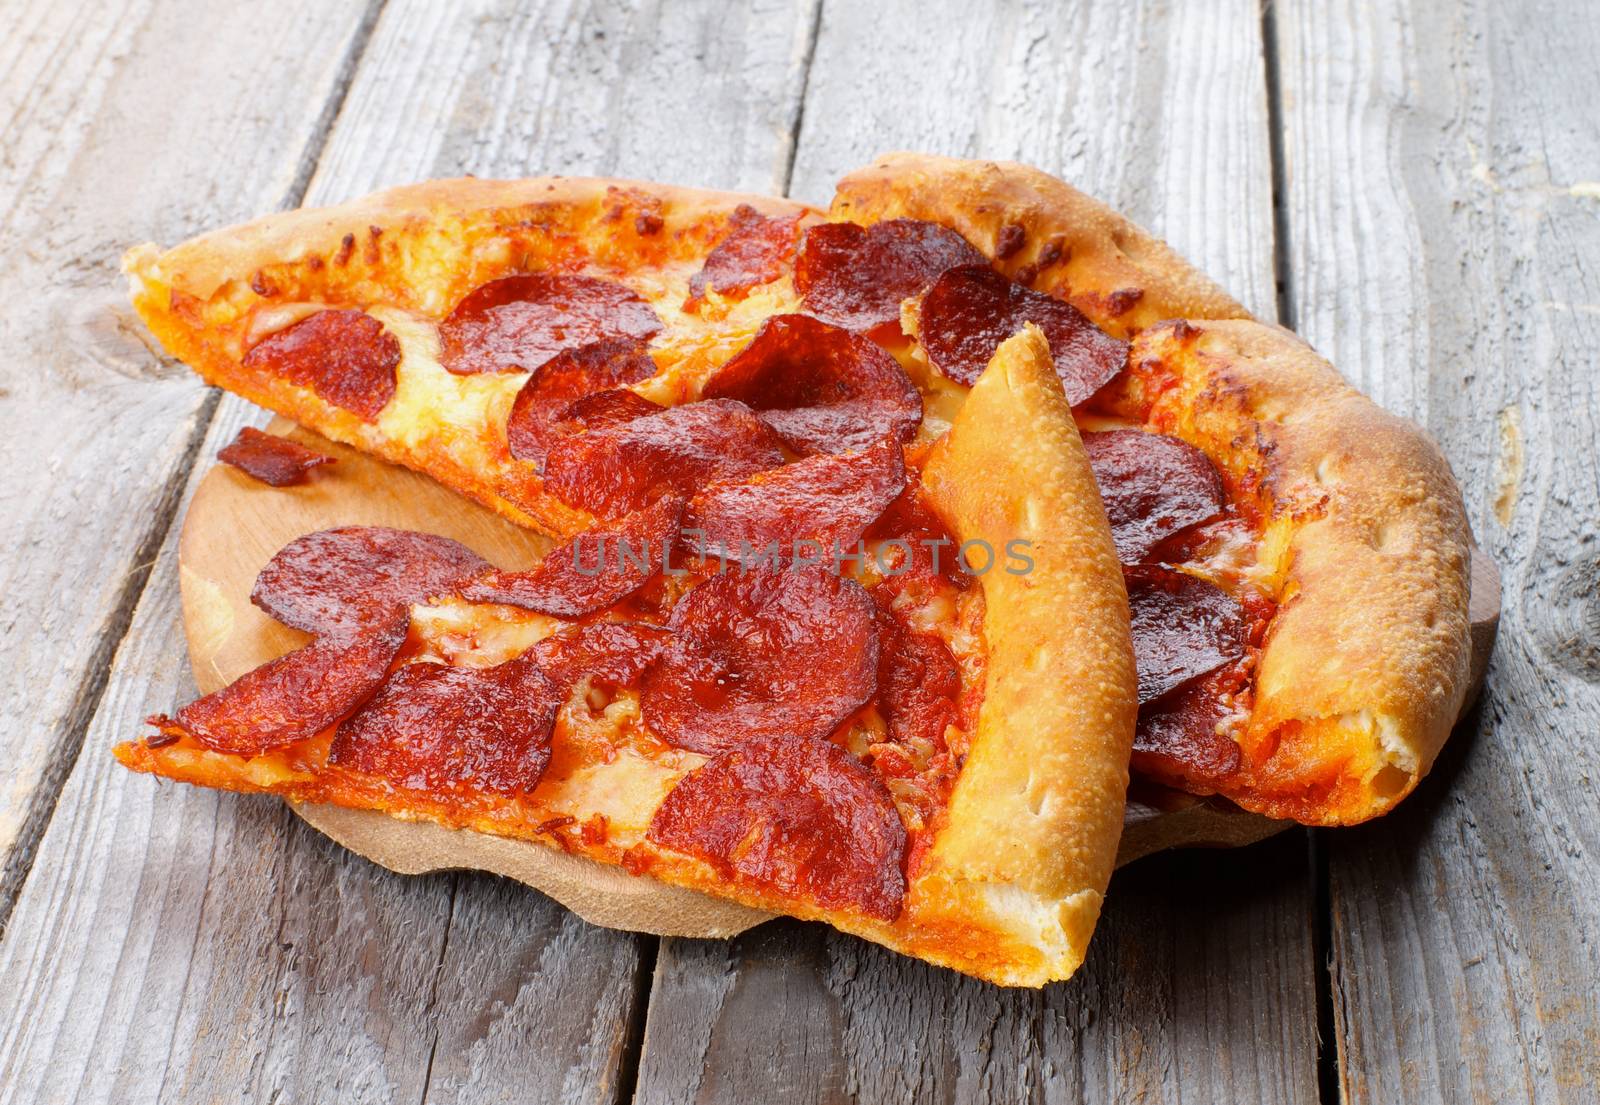 Slices of Pepperoni Pizza with Tomatoes Sauce and Cheese on Wooden Plate closeup on Rustic Wooden background